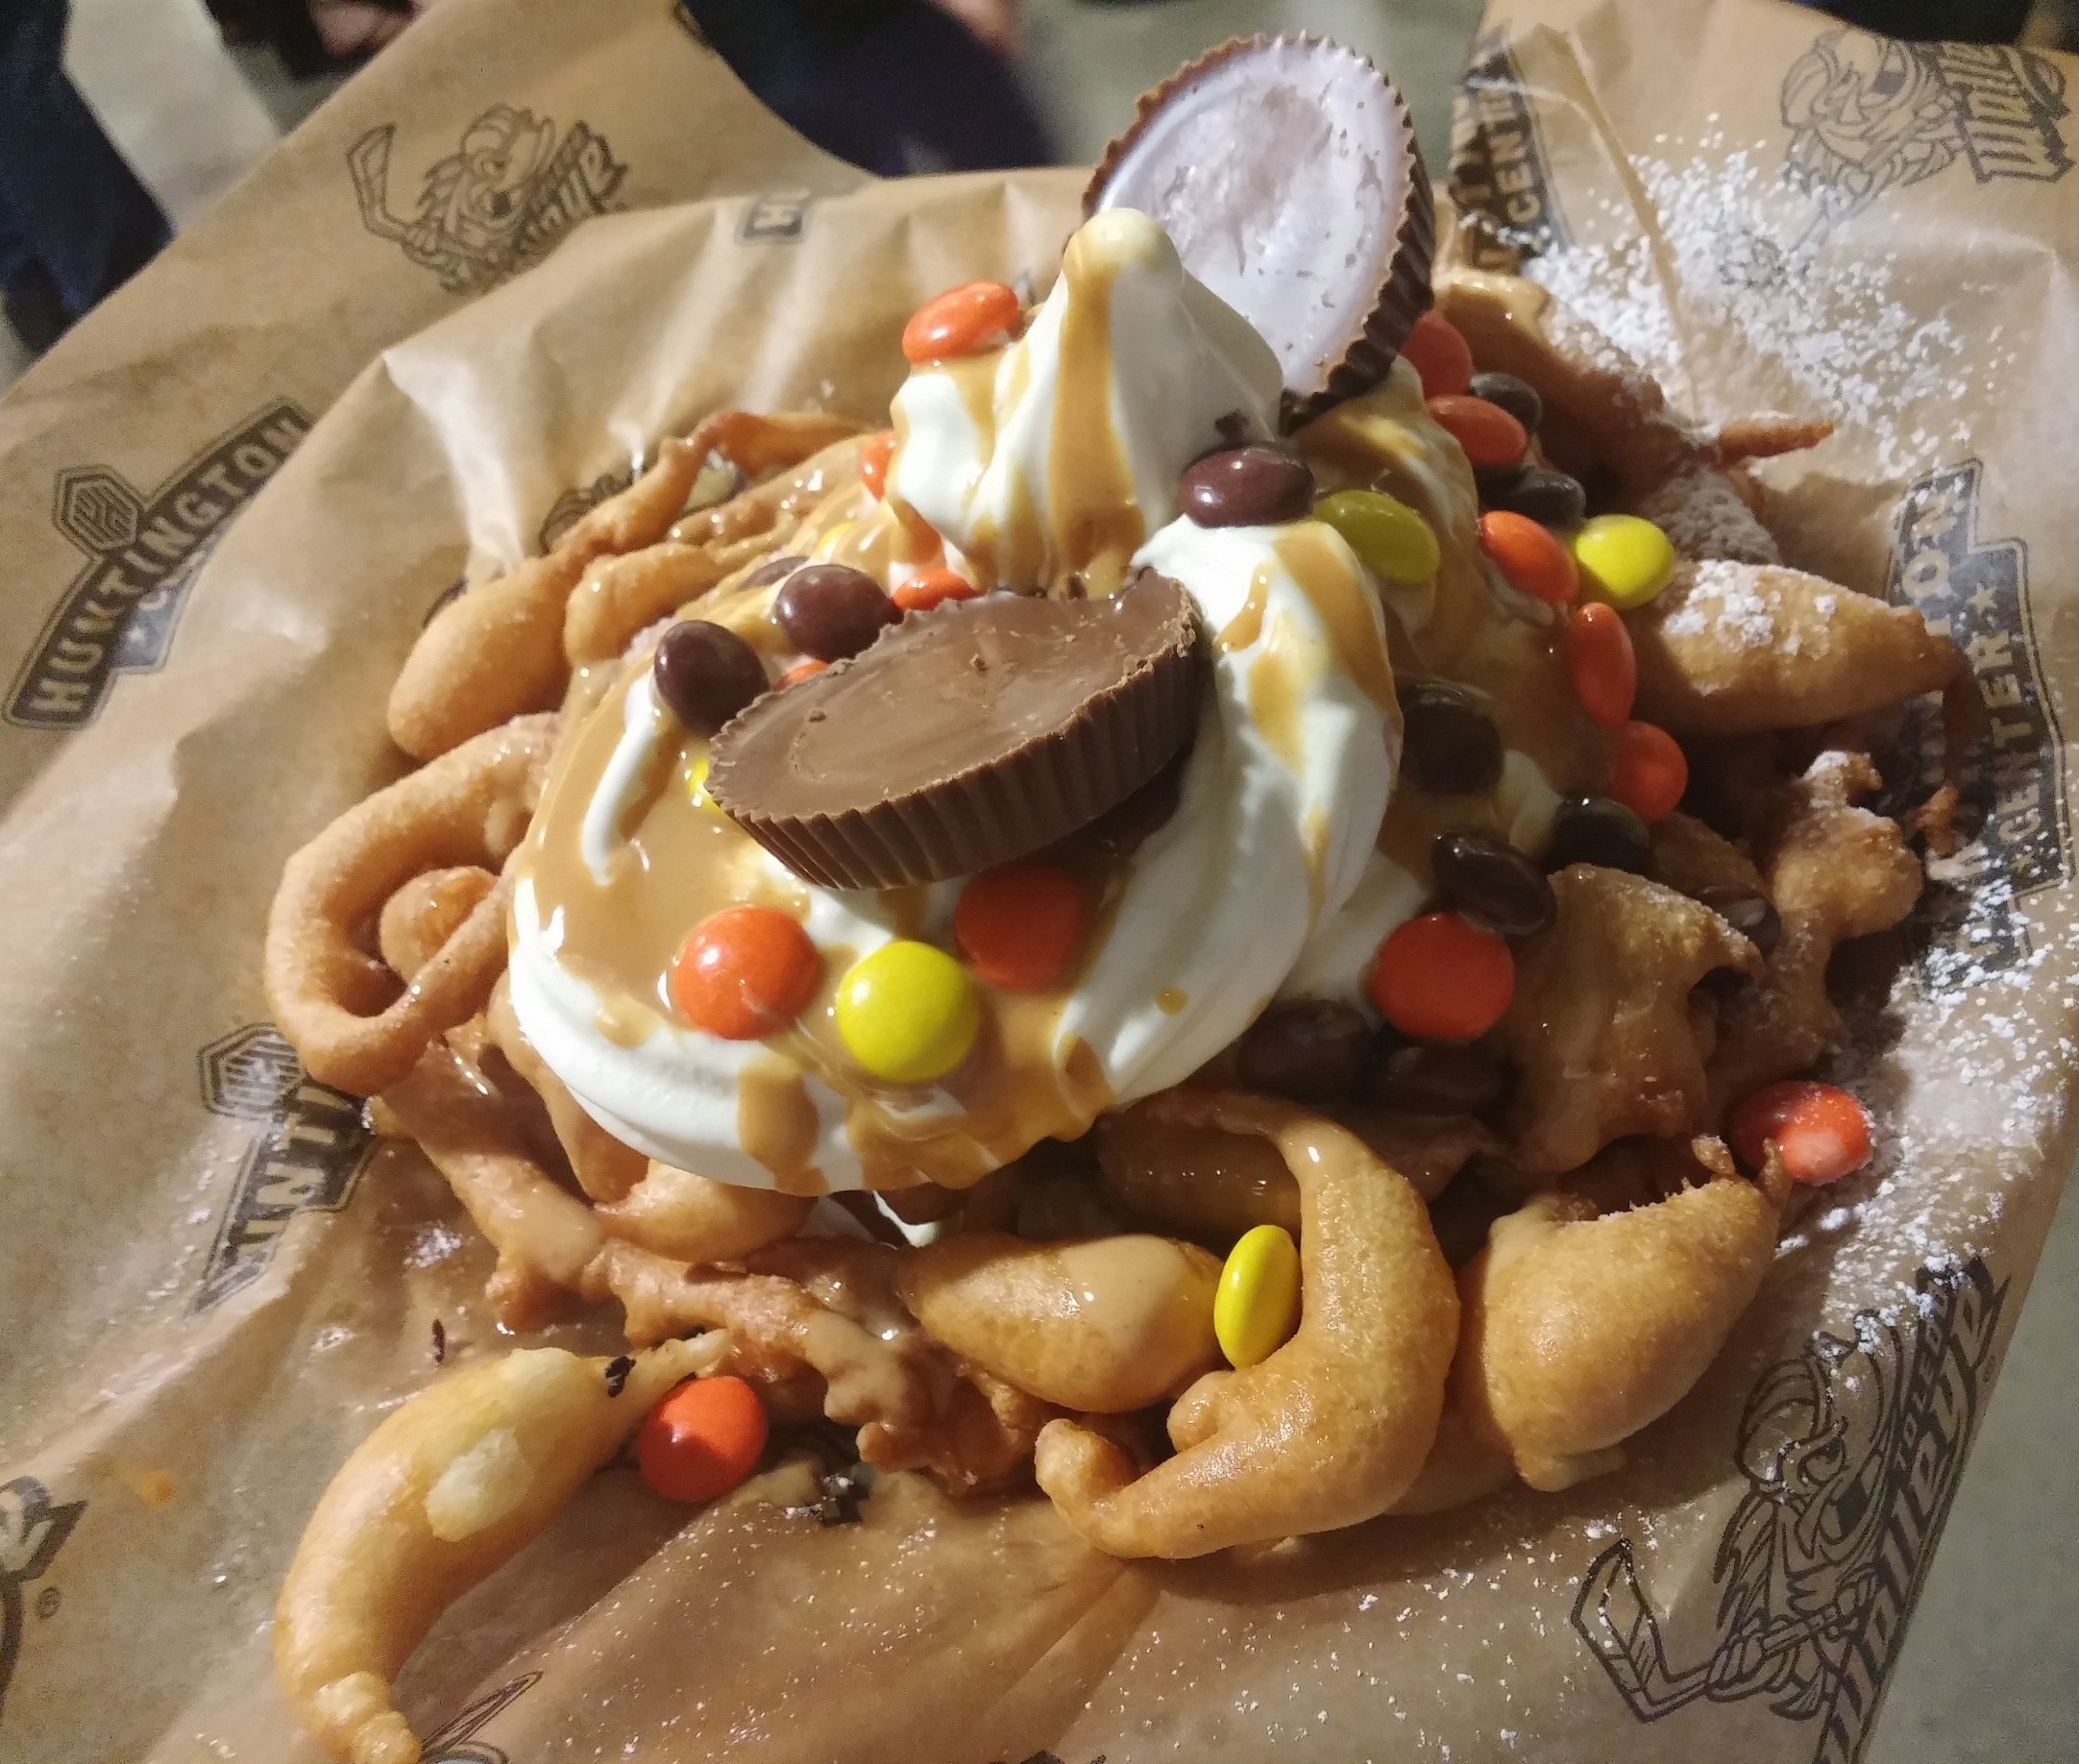 It's a Fundae served up at the @ToledoWalleye hockey game!!!

A vanilla soft serve sundae topped with peanut butter sauce, Reece's Pieces and two Reece's Peanut Butter Cups served on top of a funnel cake!